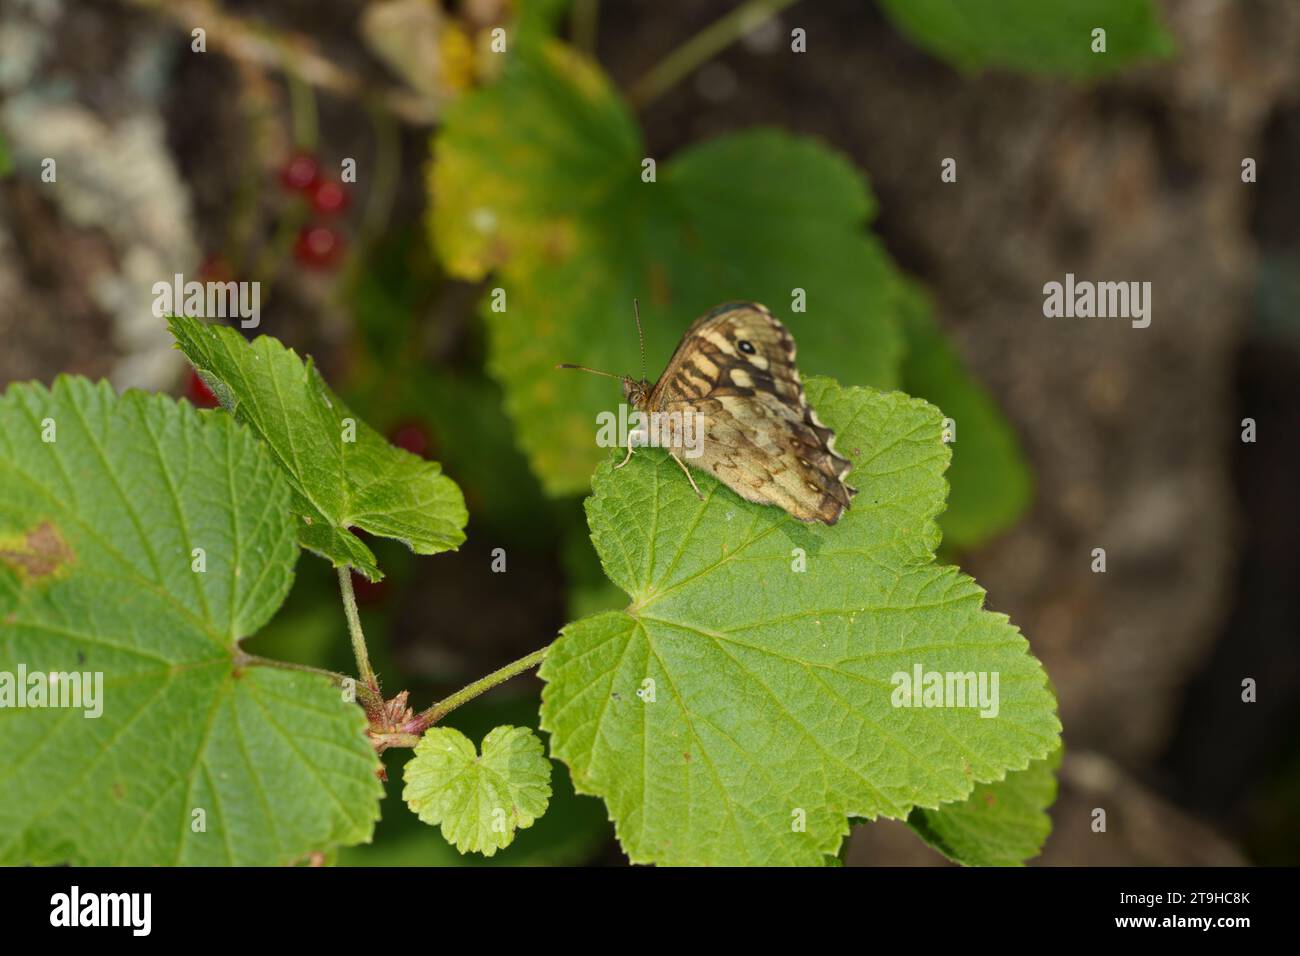 Pararge aegeria Family Nymphalidae Genus Pararge Speckled wood butterfly wild nature insect wallpaper, picture, photography Stock Photo